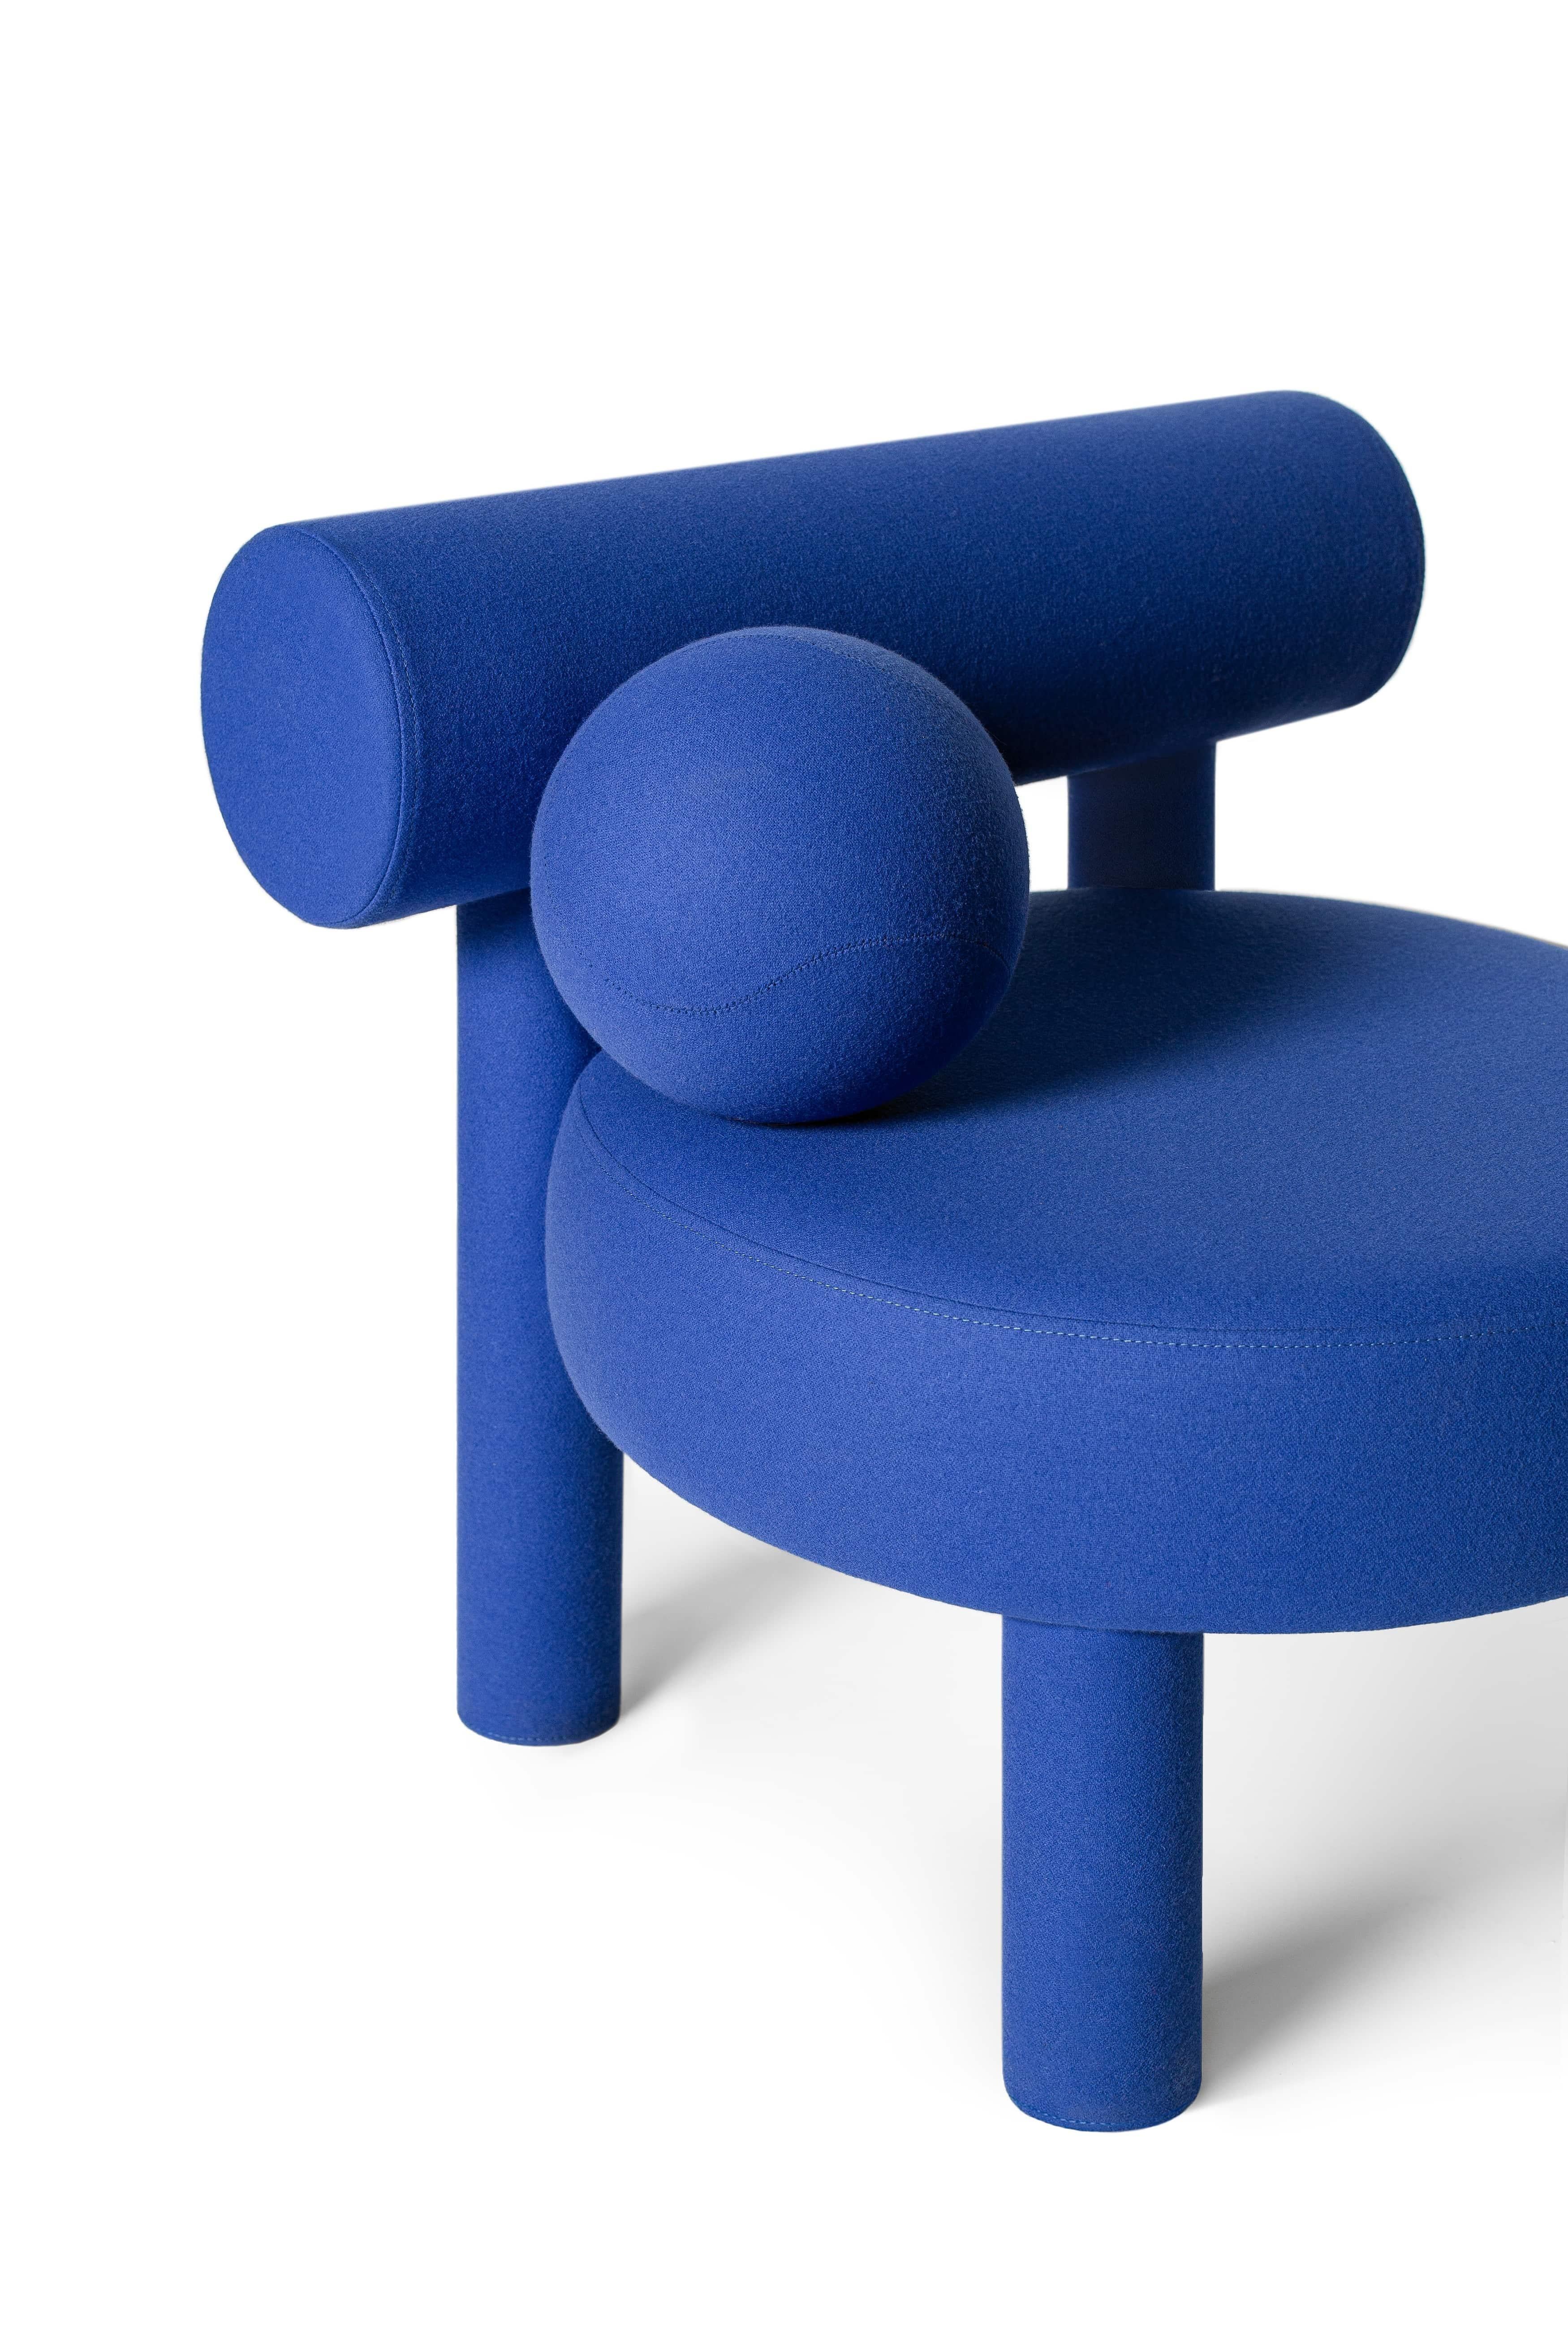 Low Chair Gropius CS1

Designer: Kateryna Sokolova
Materials: Textile, foam rubber, wood, plywood
Fabrics: Available in a wide range of fabrics by request.
Dimensions of one low chair: H 71 cm x W 75 cm x D 75 cm

New NOOM furniture collection is